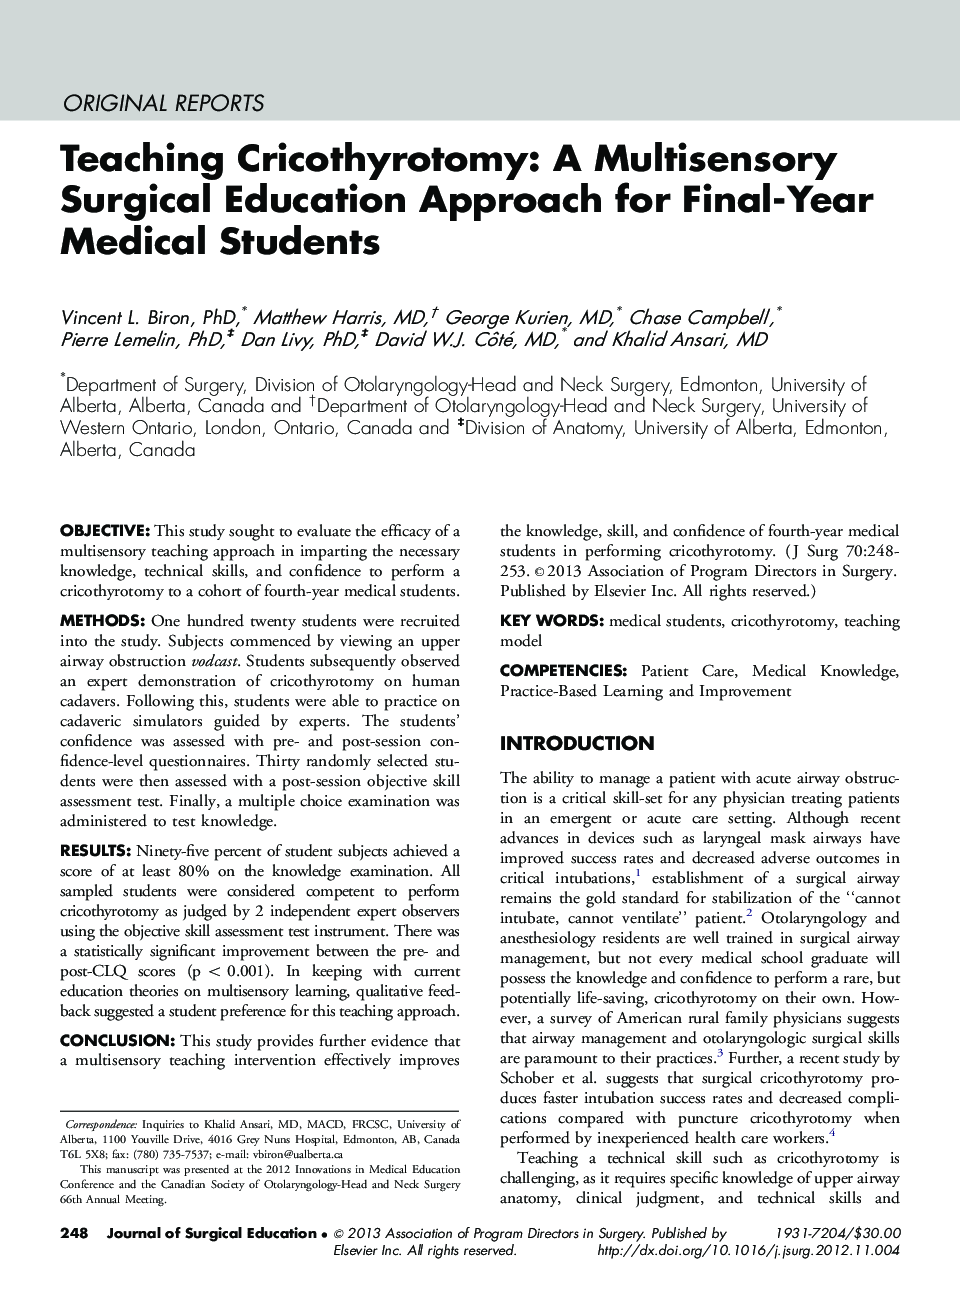 Teaching Cricothyrotomy: A Multisensory Surgical Education Approach for Final-Year Medical Students 